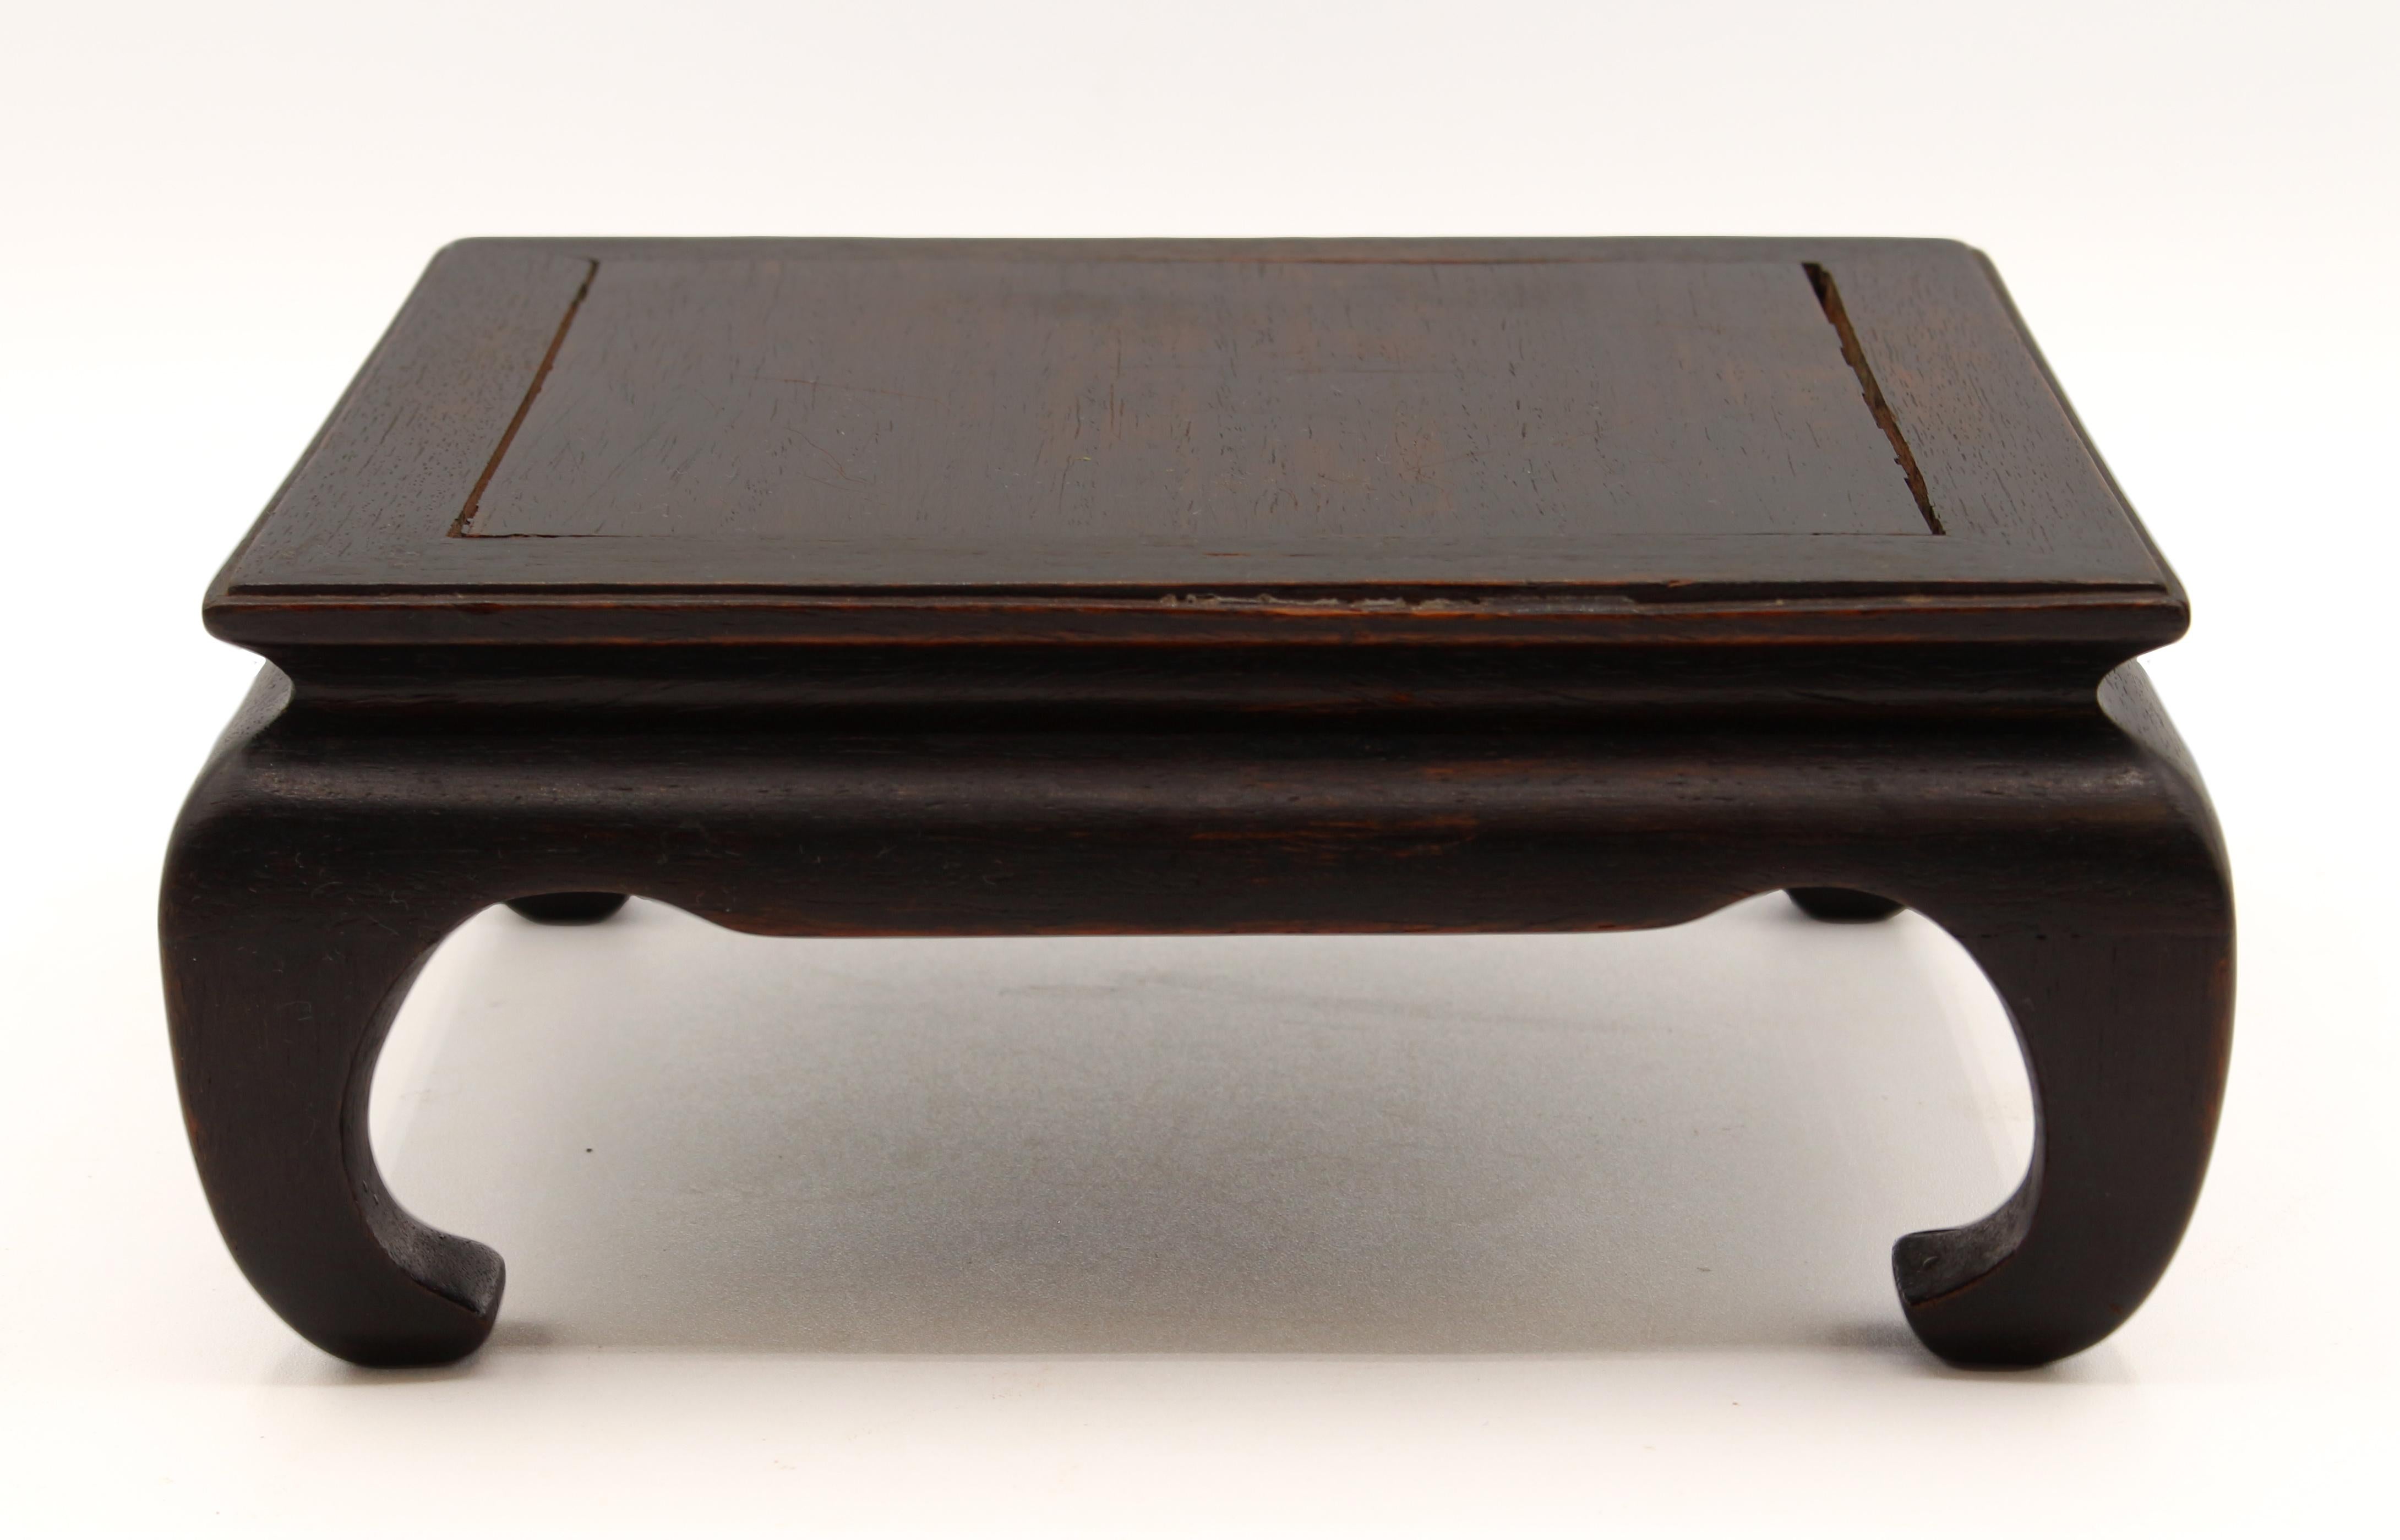 Mid-19th century table top stand of zitan wood, Chinese. Qing dynasty, Ming design. To hold a bowl, vase or figure.
7 1/8